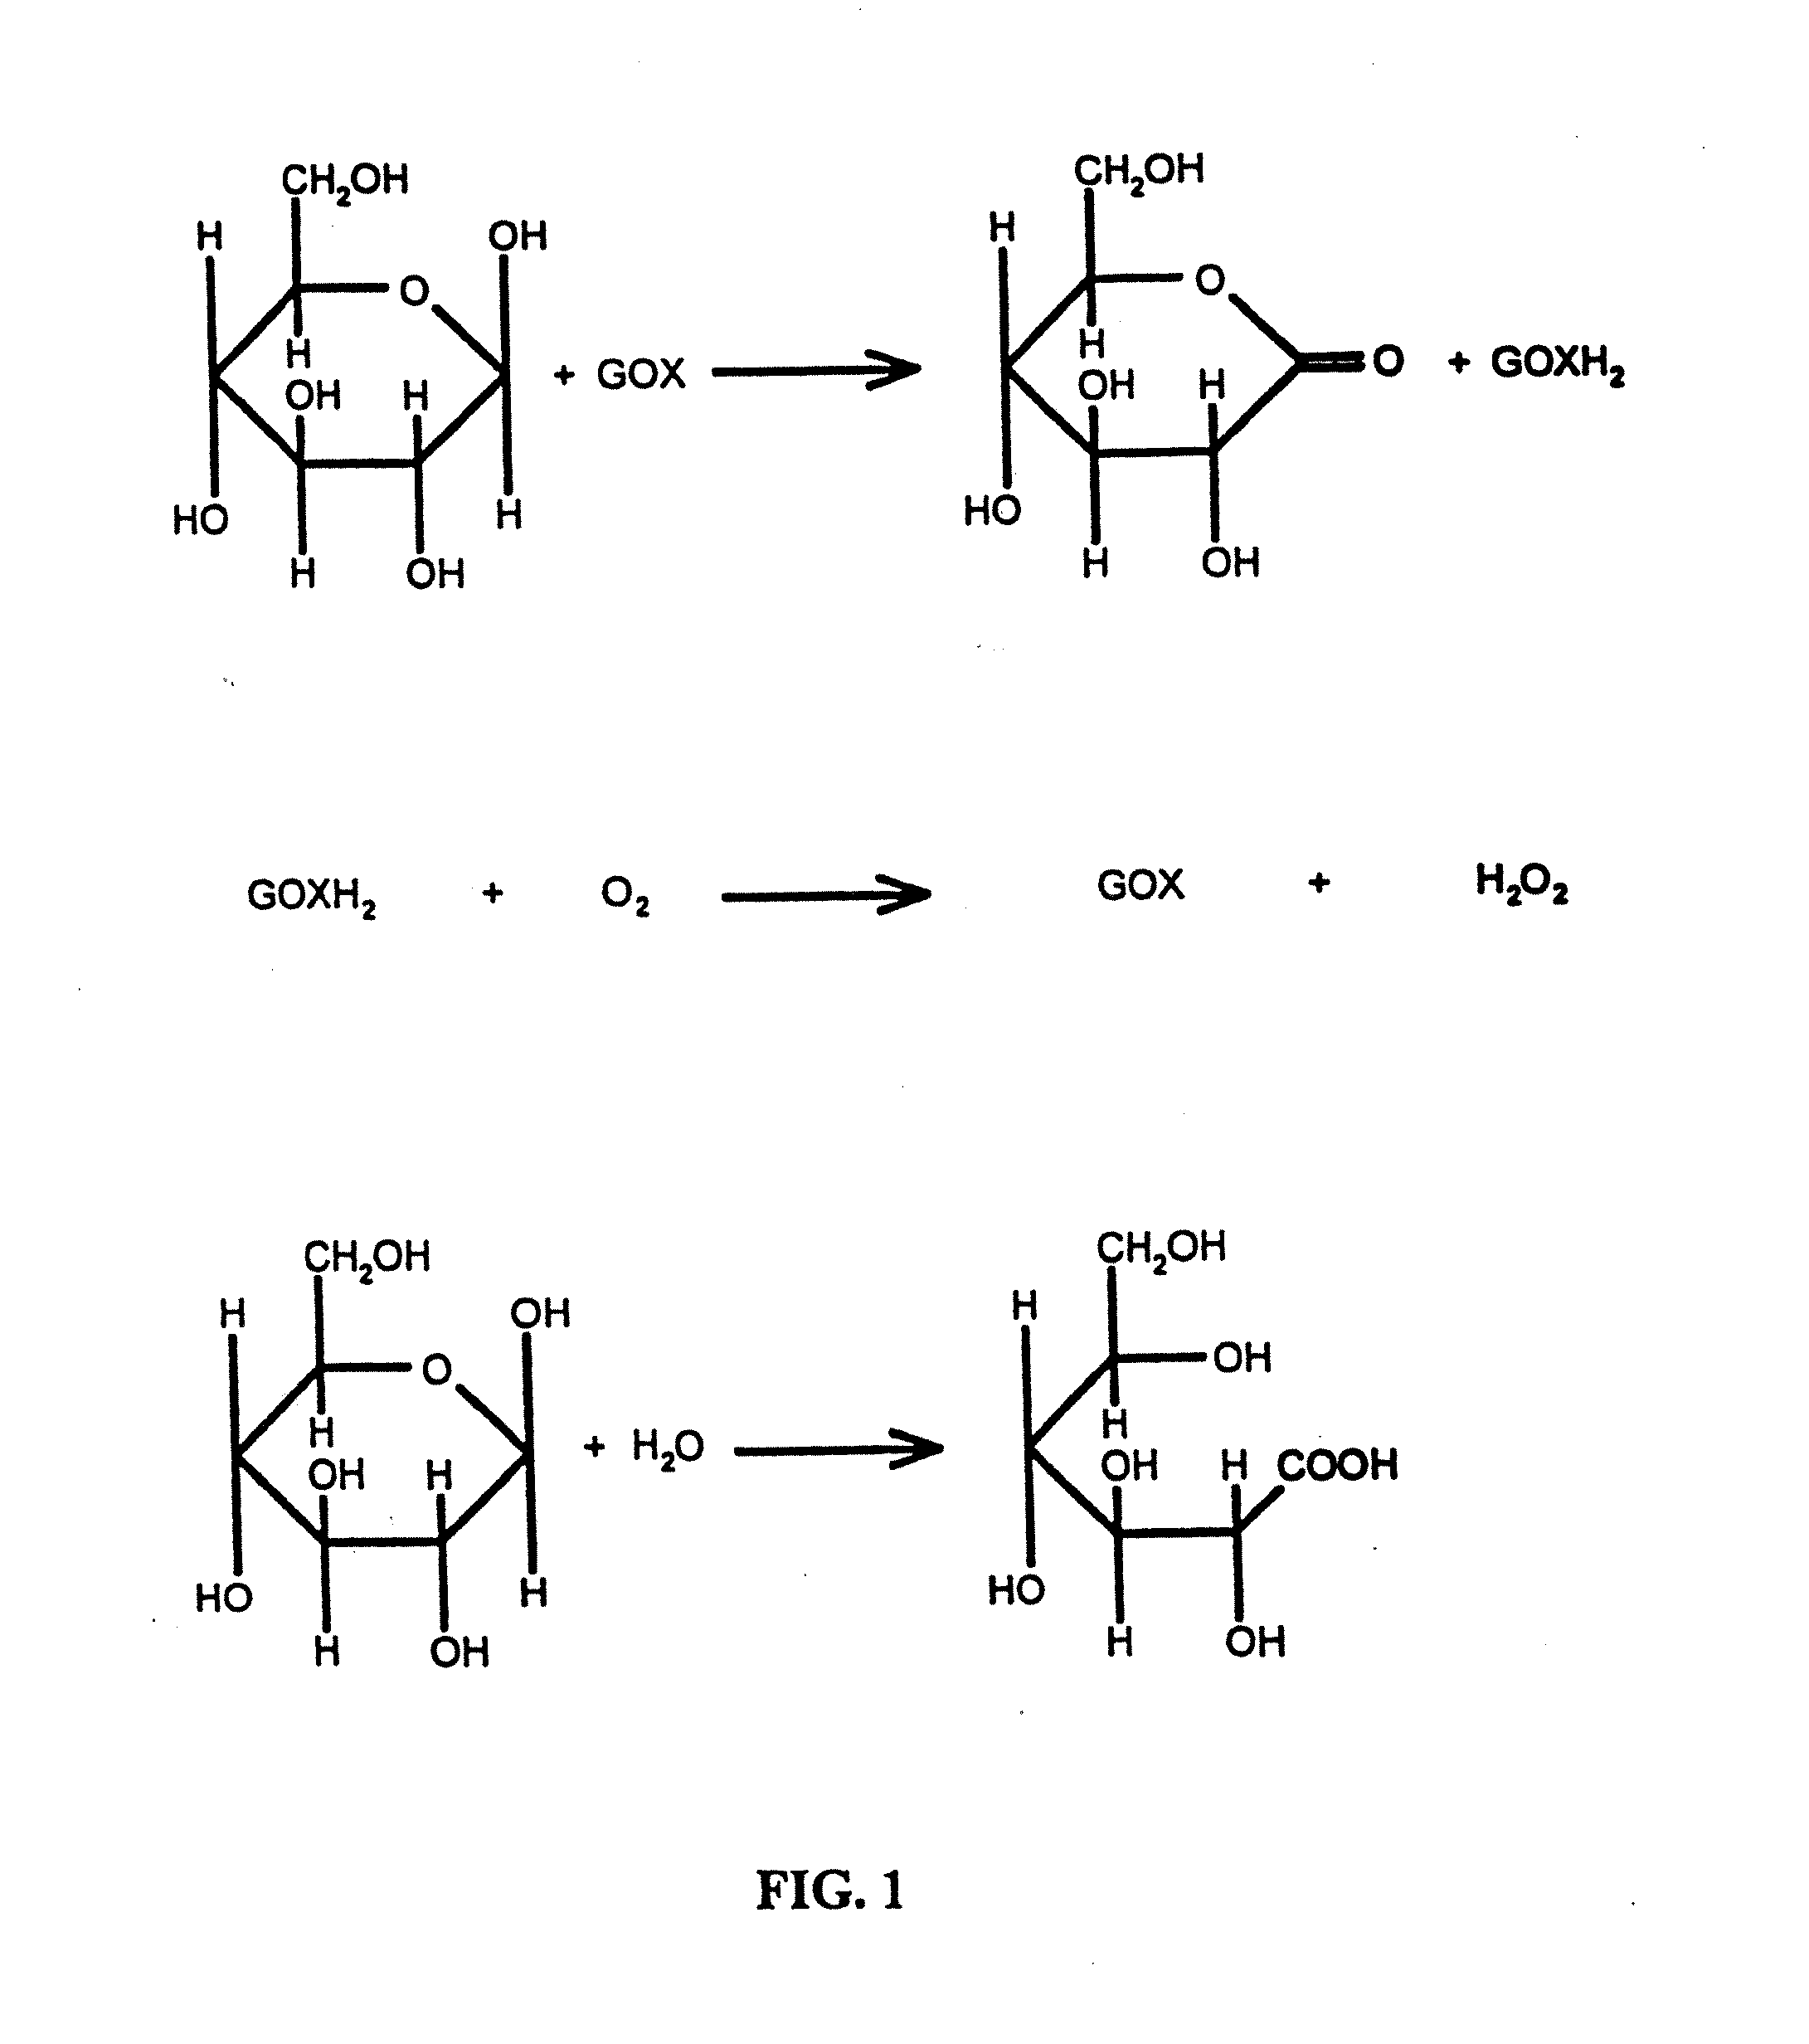 Analyte sensors comprising blended membrane compositions and methods for making and using them